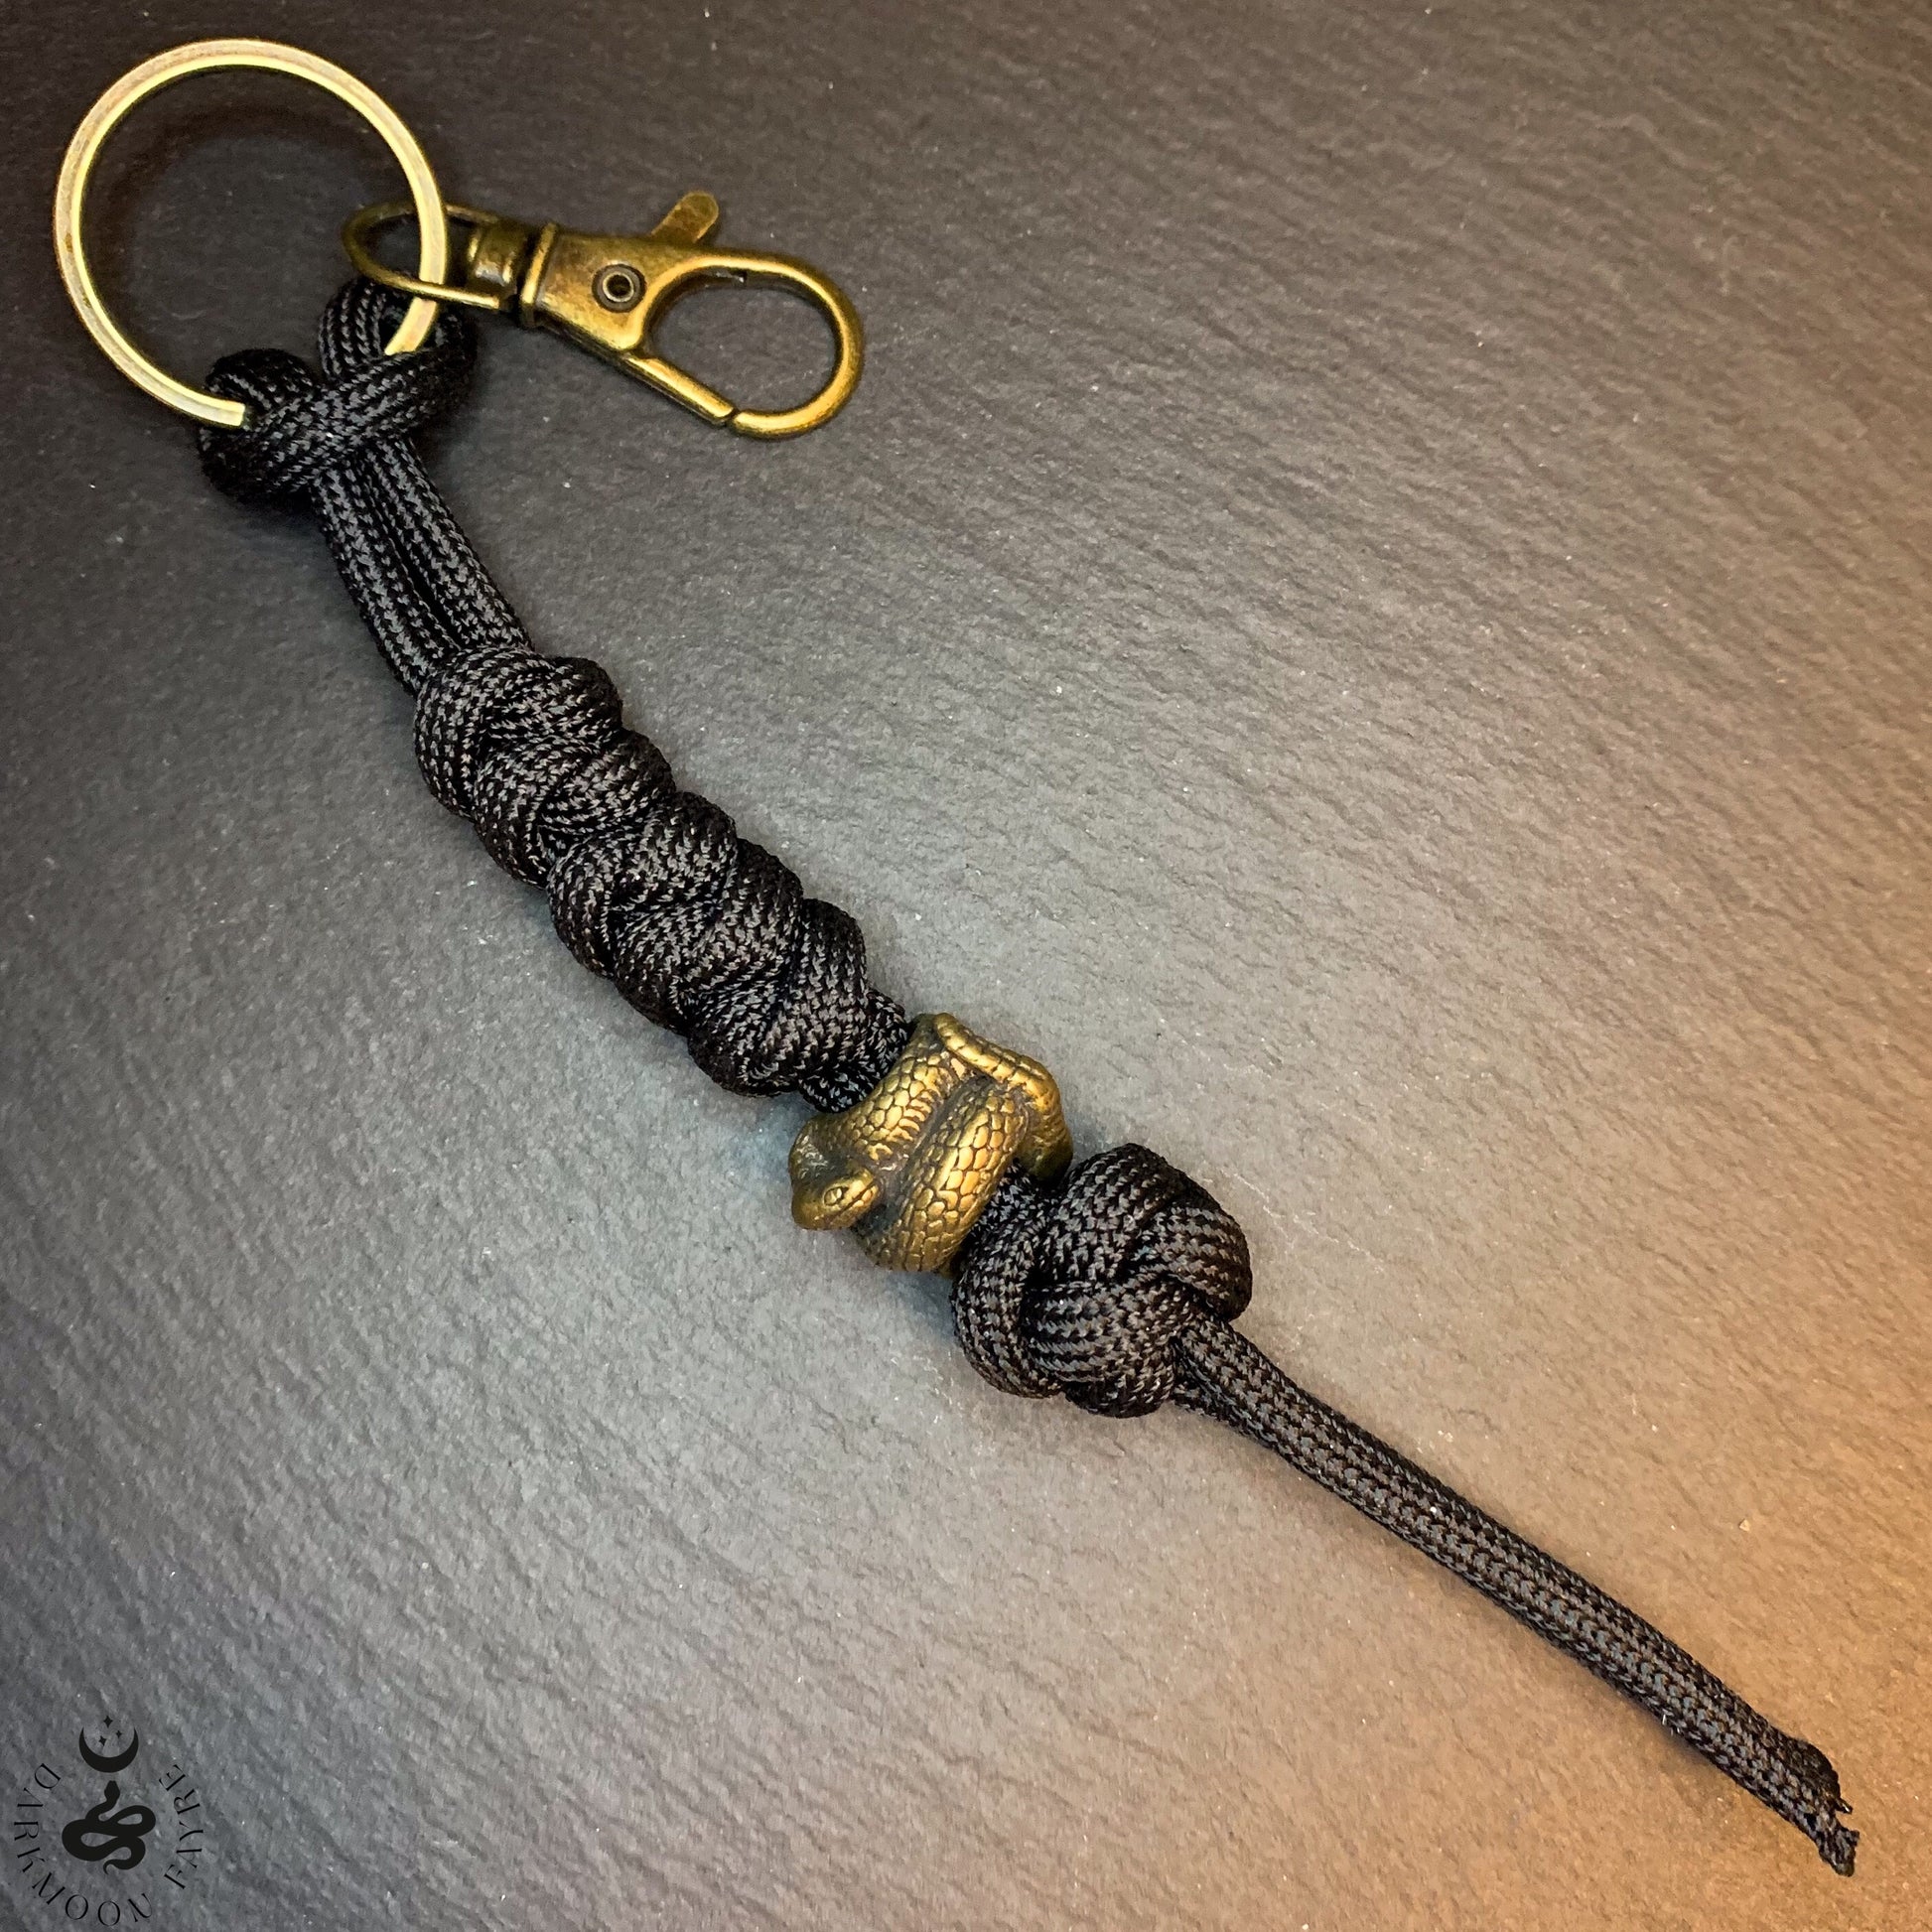 Japanese Netsuke Style Snake Keyring In Antiqued Bronze, can also be used as a zipper pull, knife lanyard, bag or boot charm - Darkmoon Fayre